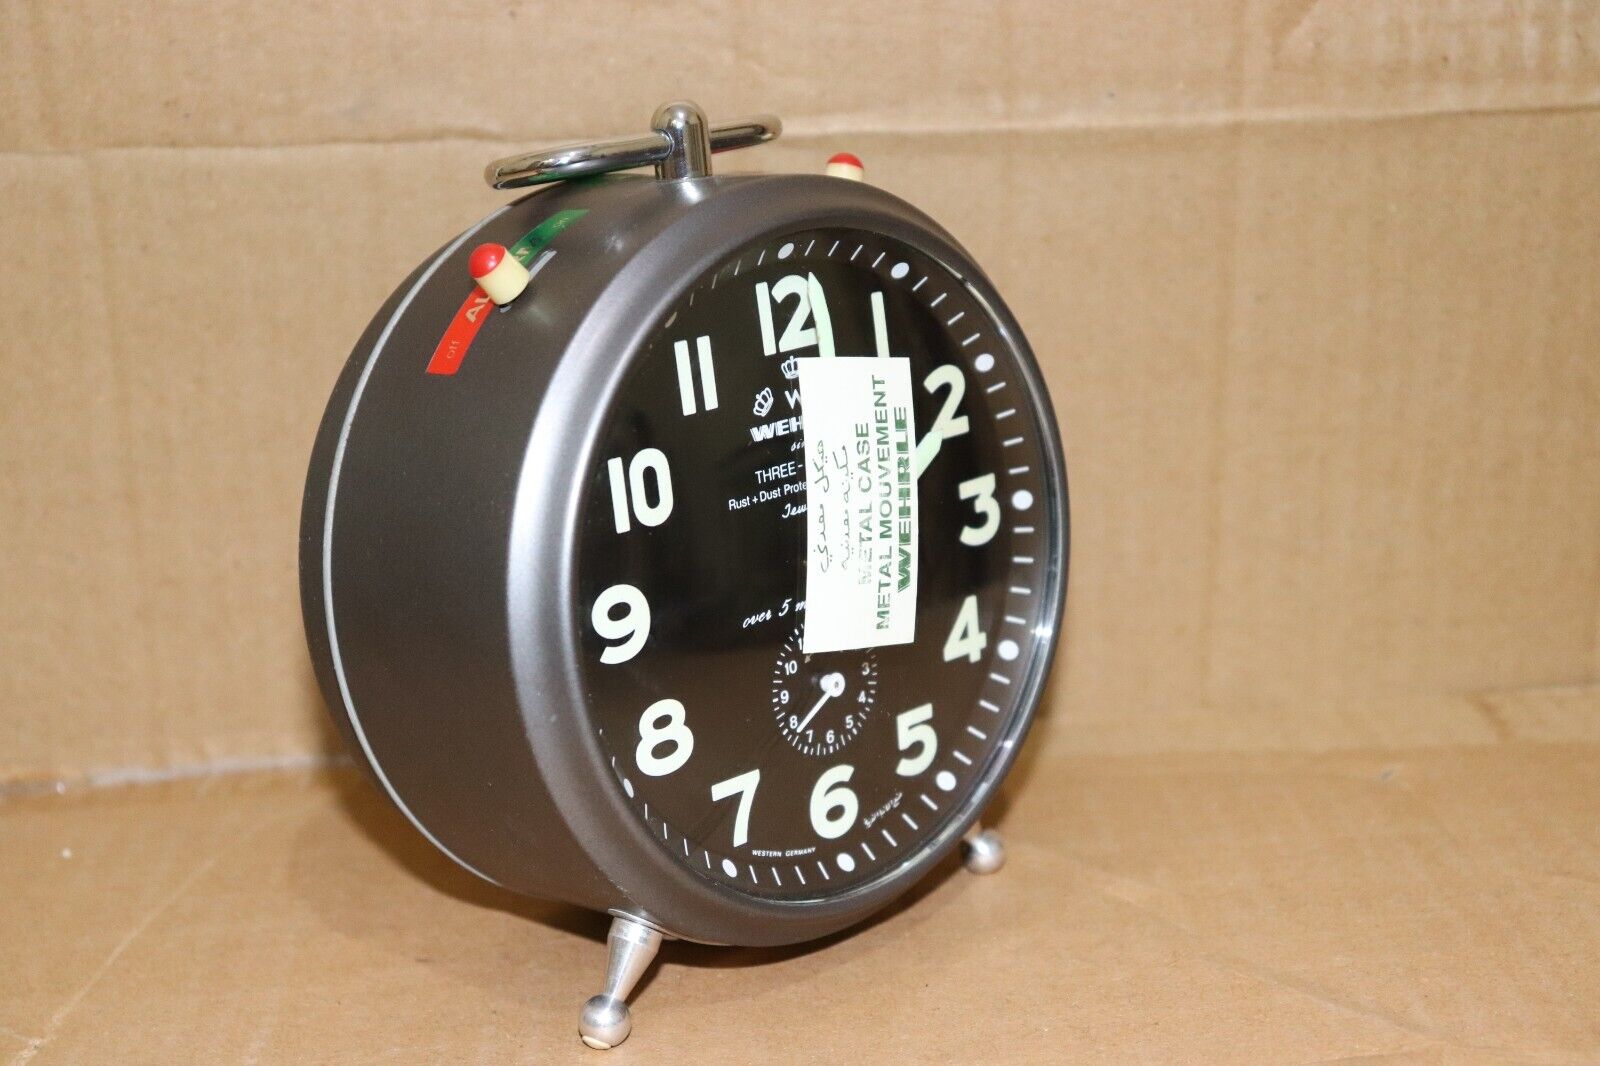 New,Rare Vintage Three In One Wehrle Alarm Clock Made In Germany Original box.